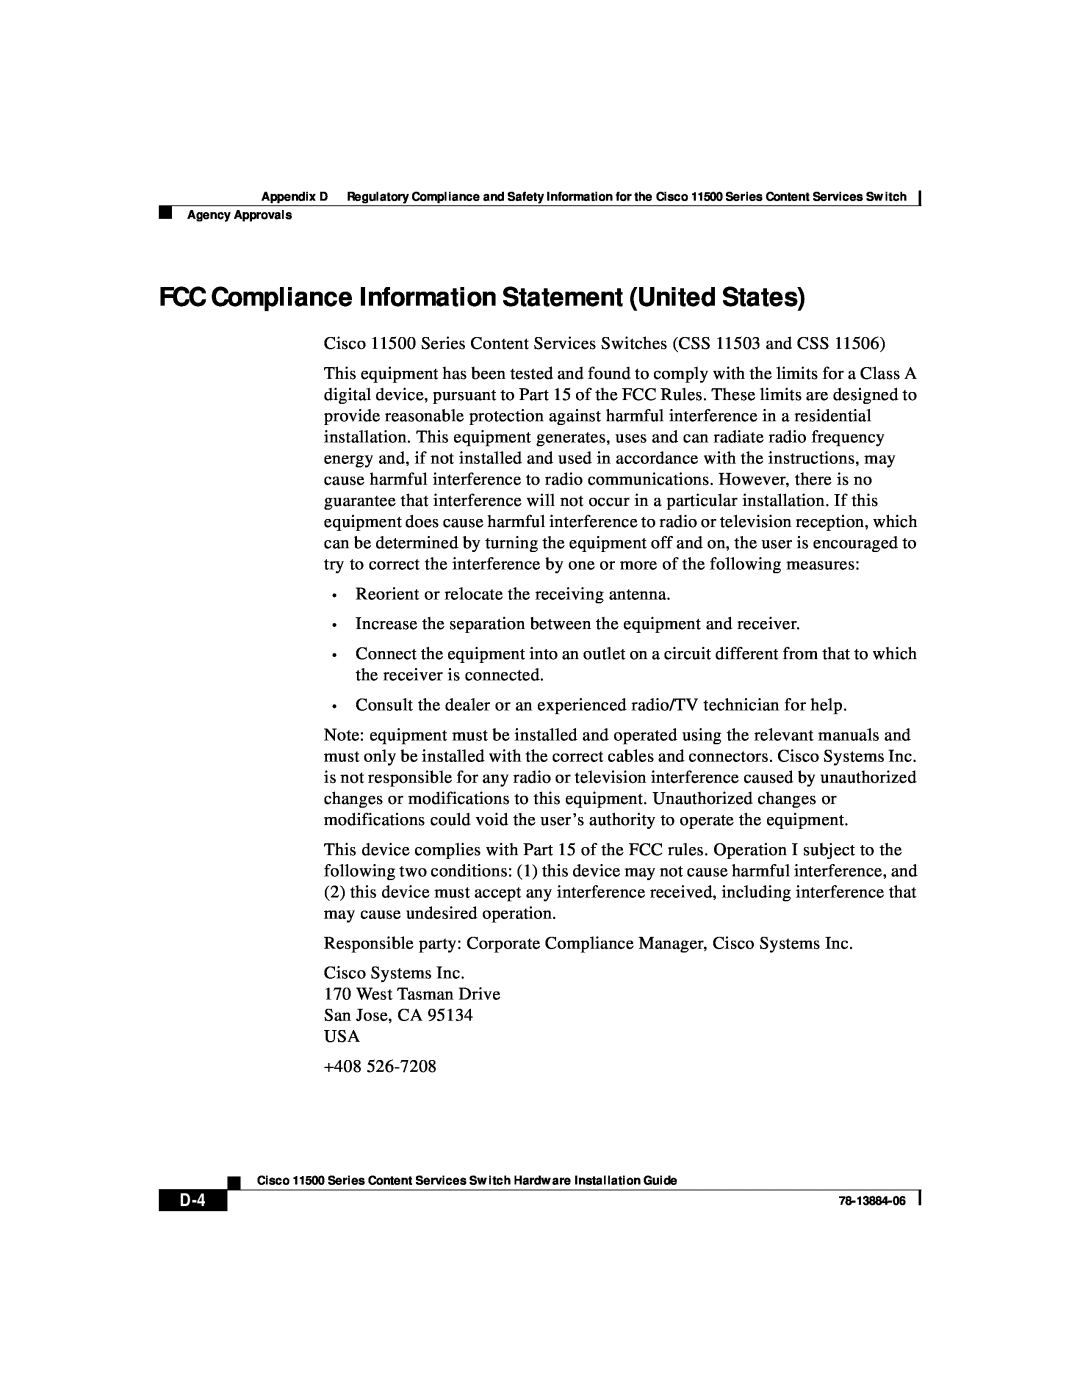 Cisco Systems 11500 Series manual FCC Compliance Information Statement United States 